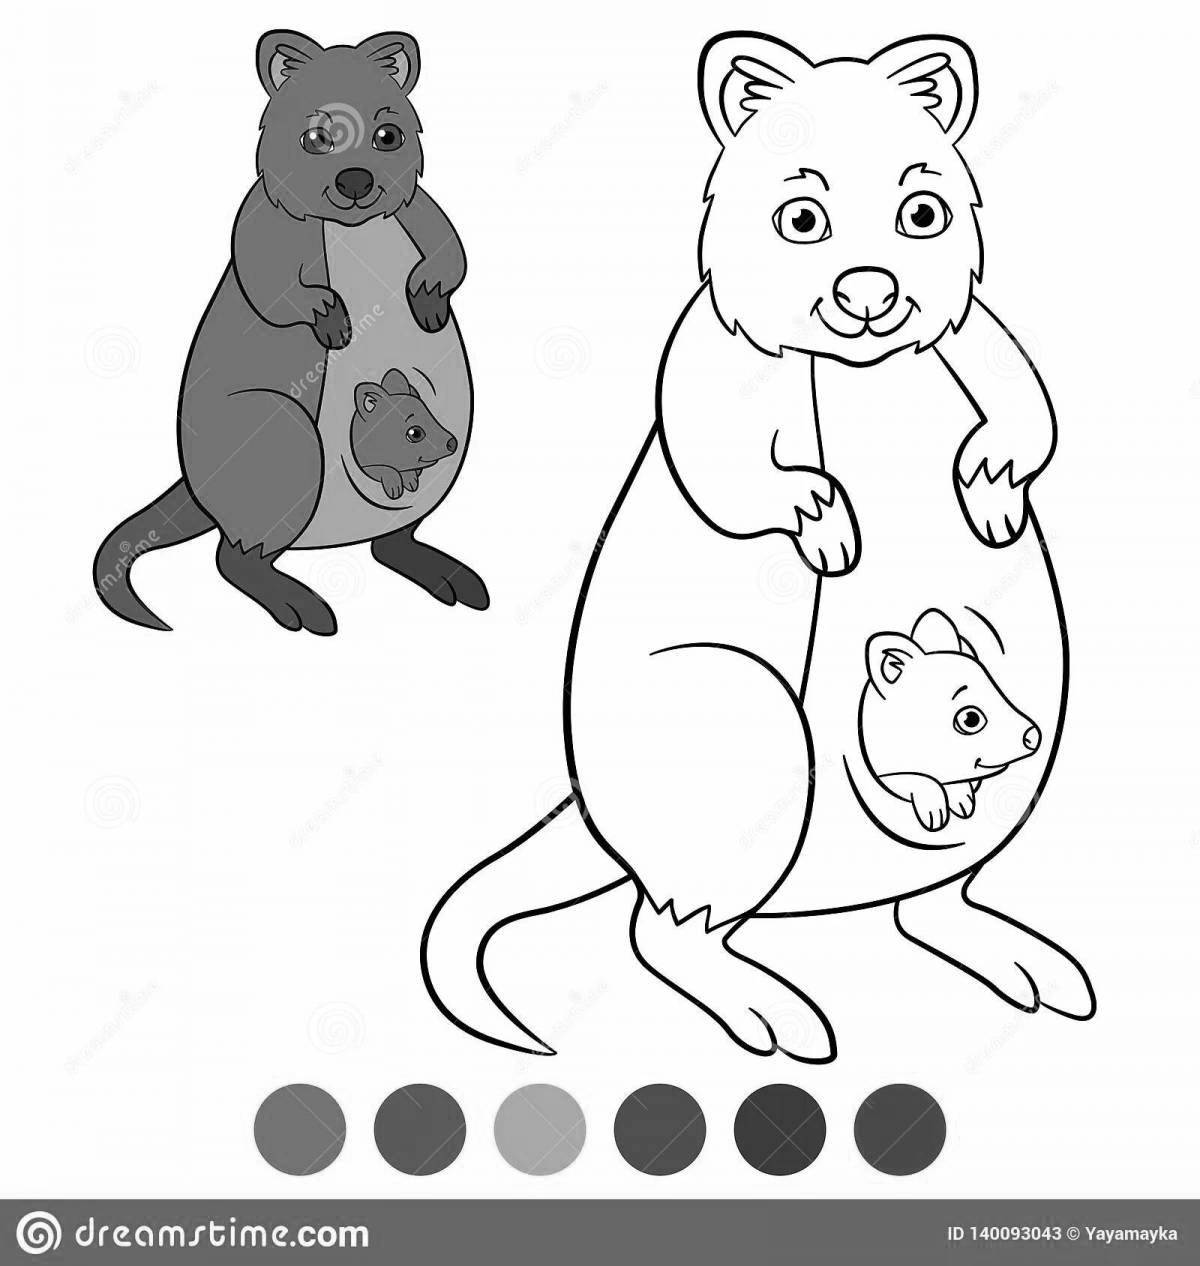 Colorful quokka coloring page